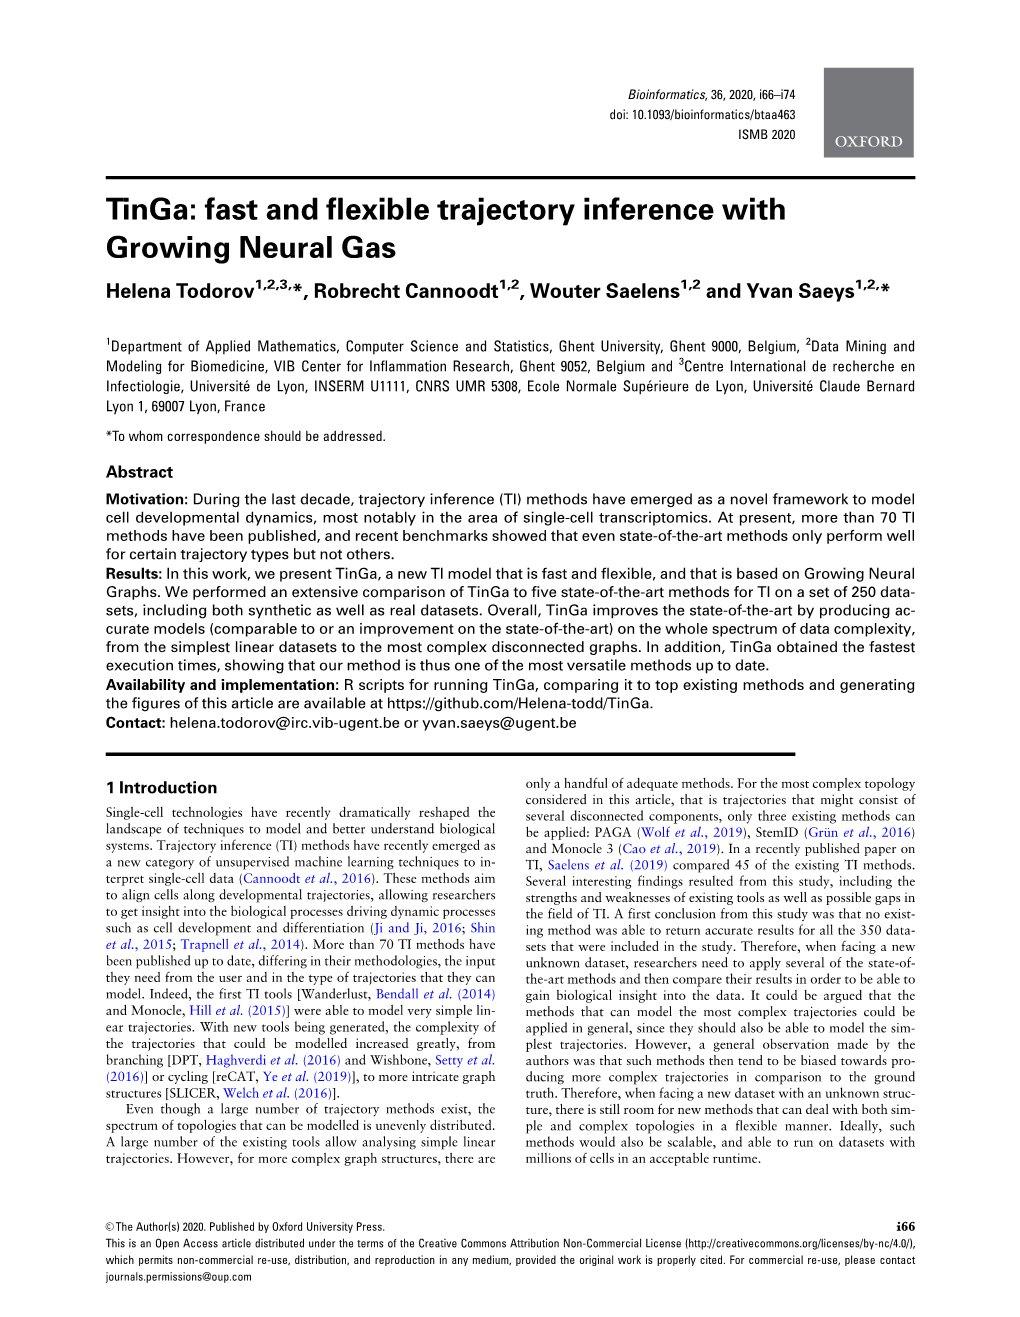 Fast and Flexible Trajectory Inference with Growing Neural Gas Helena Todorov1,2,3,*, Robrecht Cannoodt1,2, Wouter Saelens1,2 and Yvan Saeys1,2,*